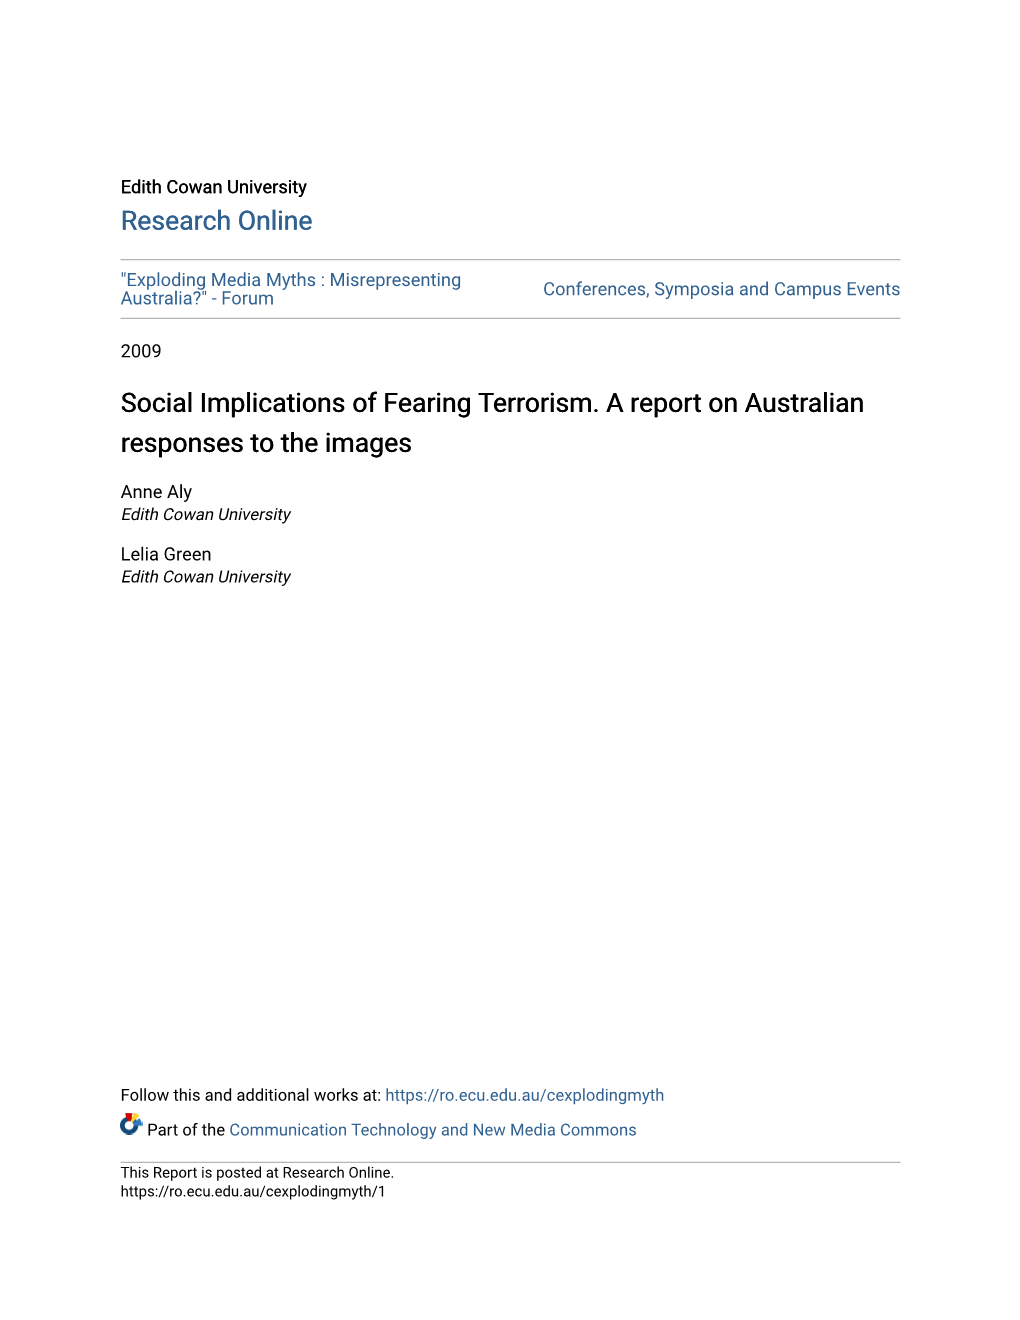 Social Implications of Fearing Terrorism. a Report on Australian Responses to the Images